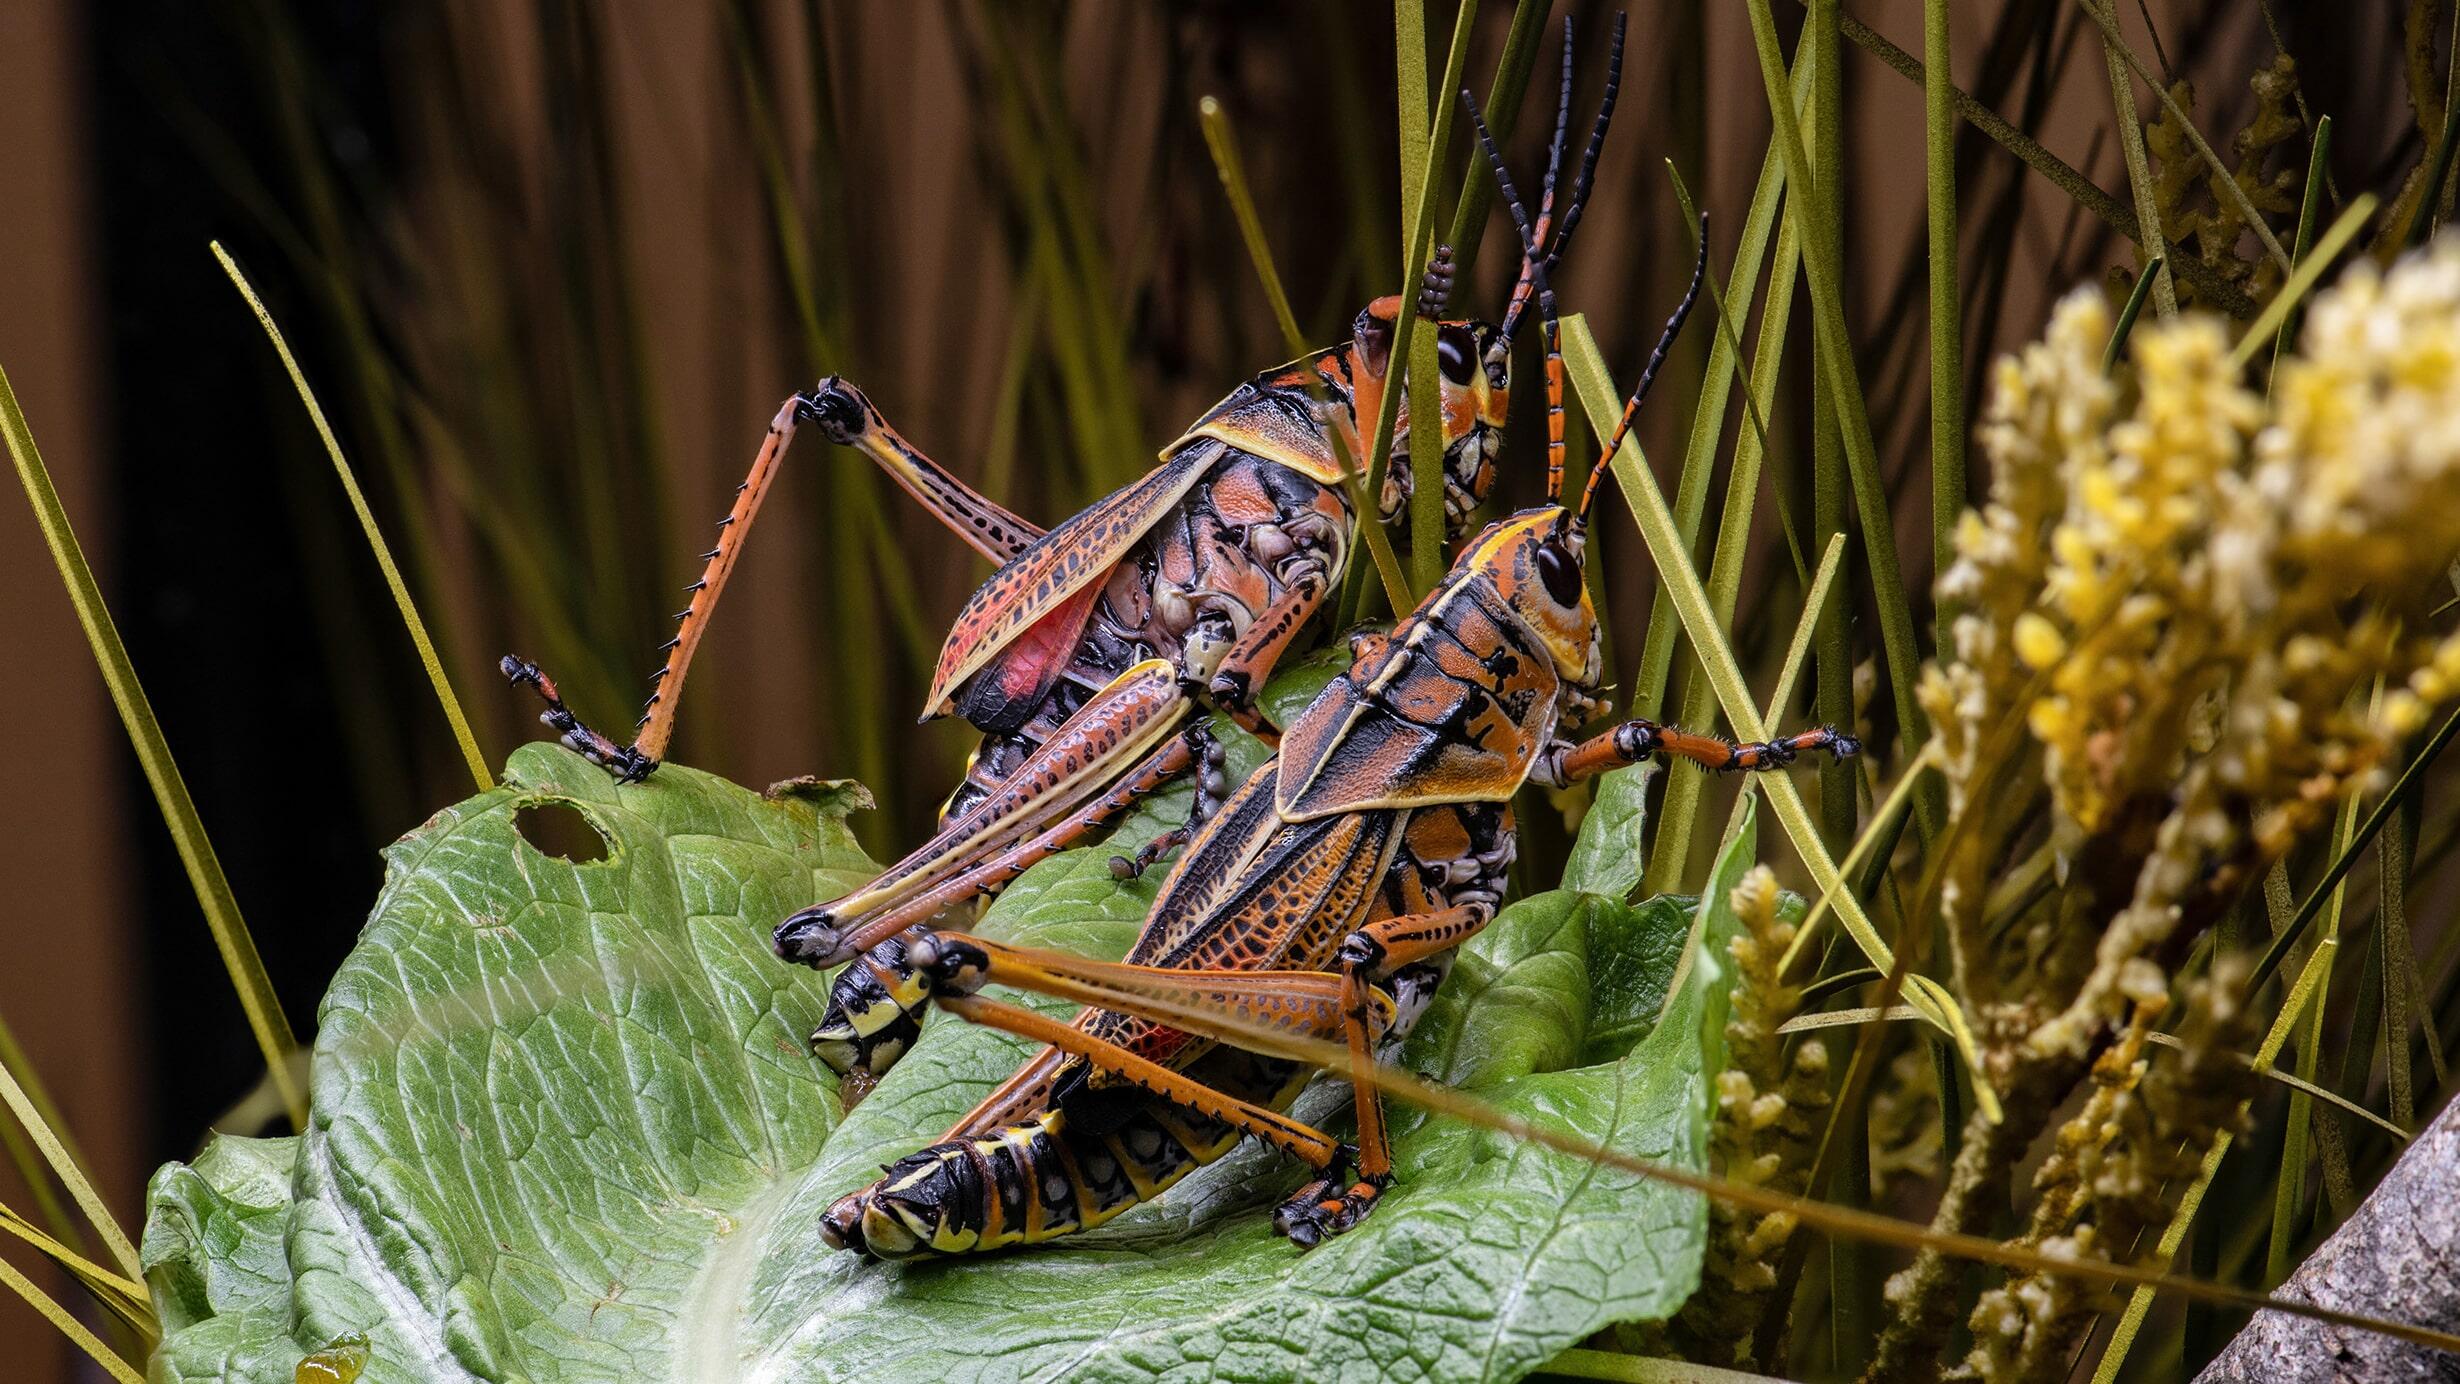 Two easter lubber grasshoppers, each about 3" in length, resting on a large leaf. Their bodies are colored in hues of orange, brown and black.